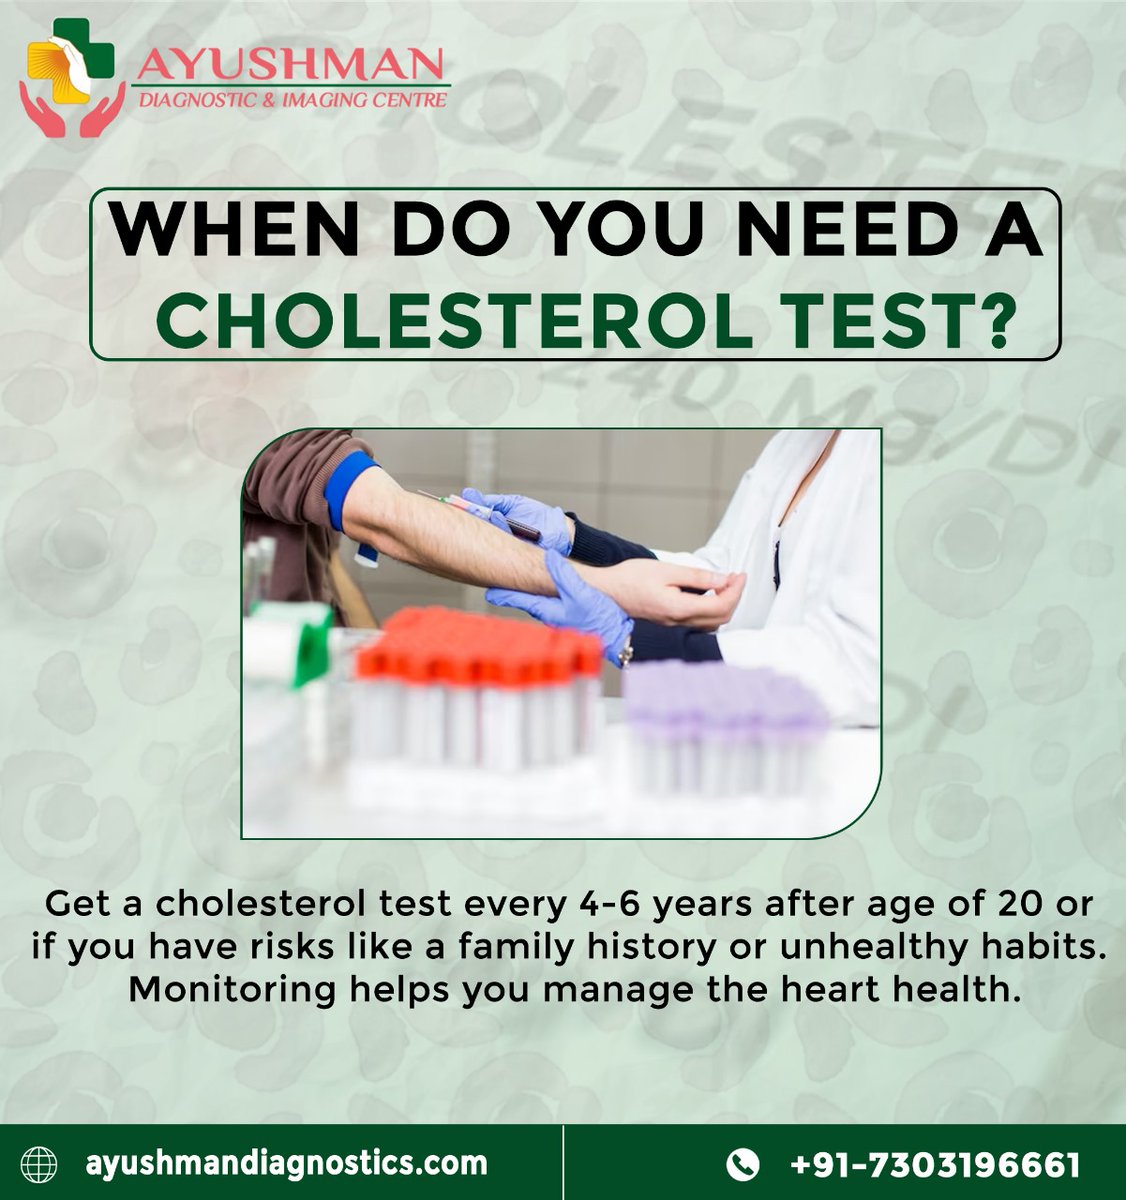 Don't wait, check your cholesterol! It could save your life. Get tested today. ⏰🫀

#cholesterol #cholesterollevel #cholesterollevels #cholesterolproblems #cholesterolcontrol #cholesterolawareness #diagnostic #medical  #dwarka #delhi #ayushmancentreofexcellence